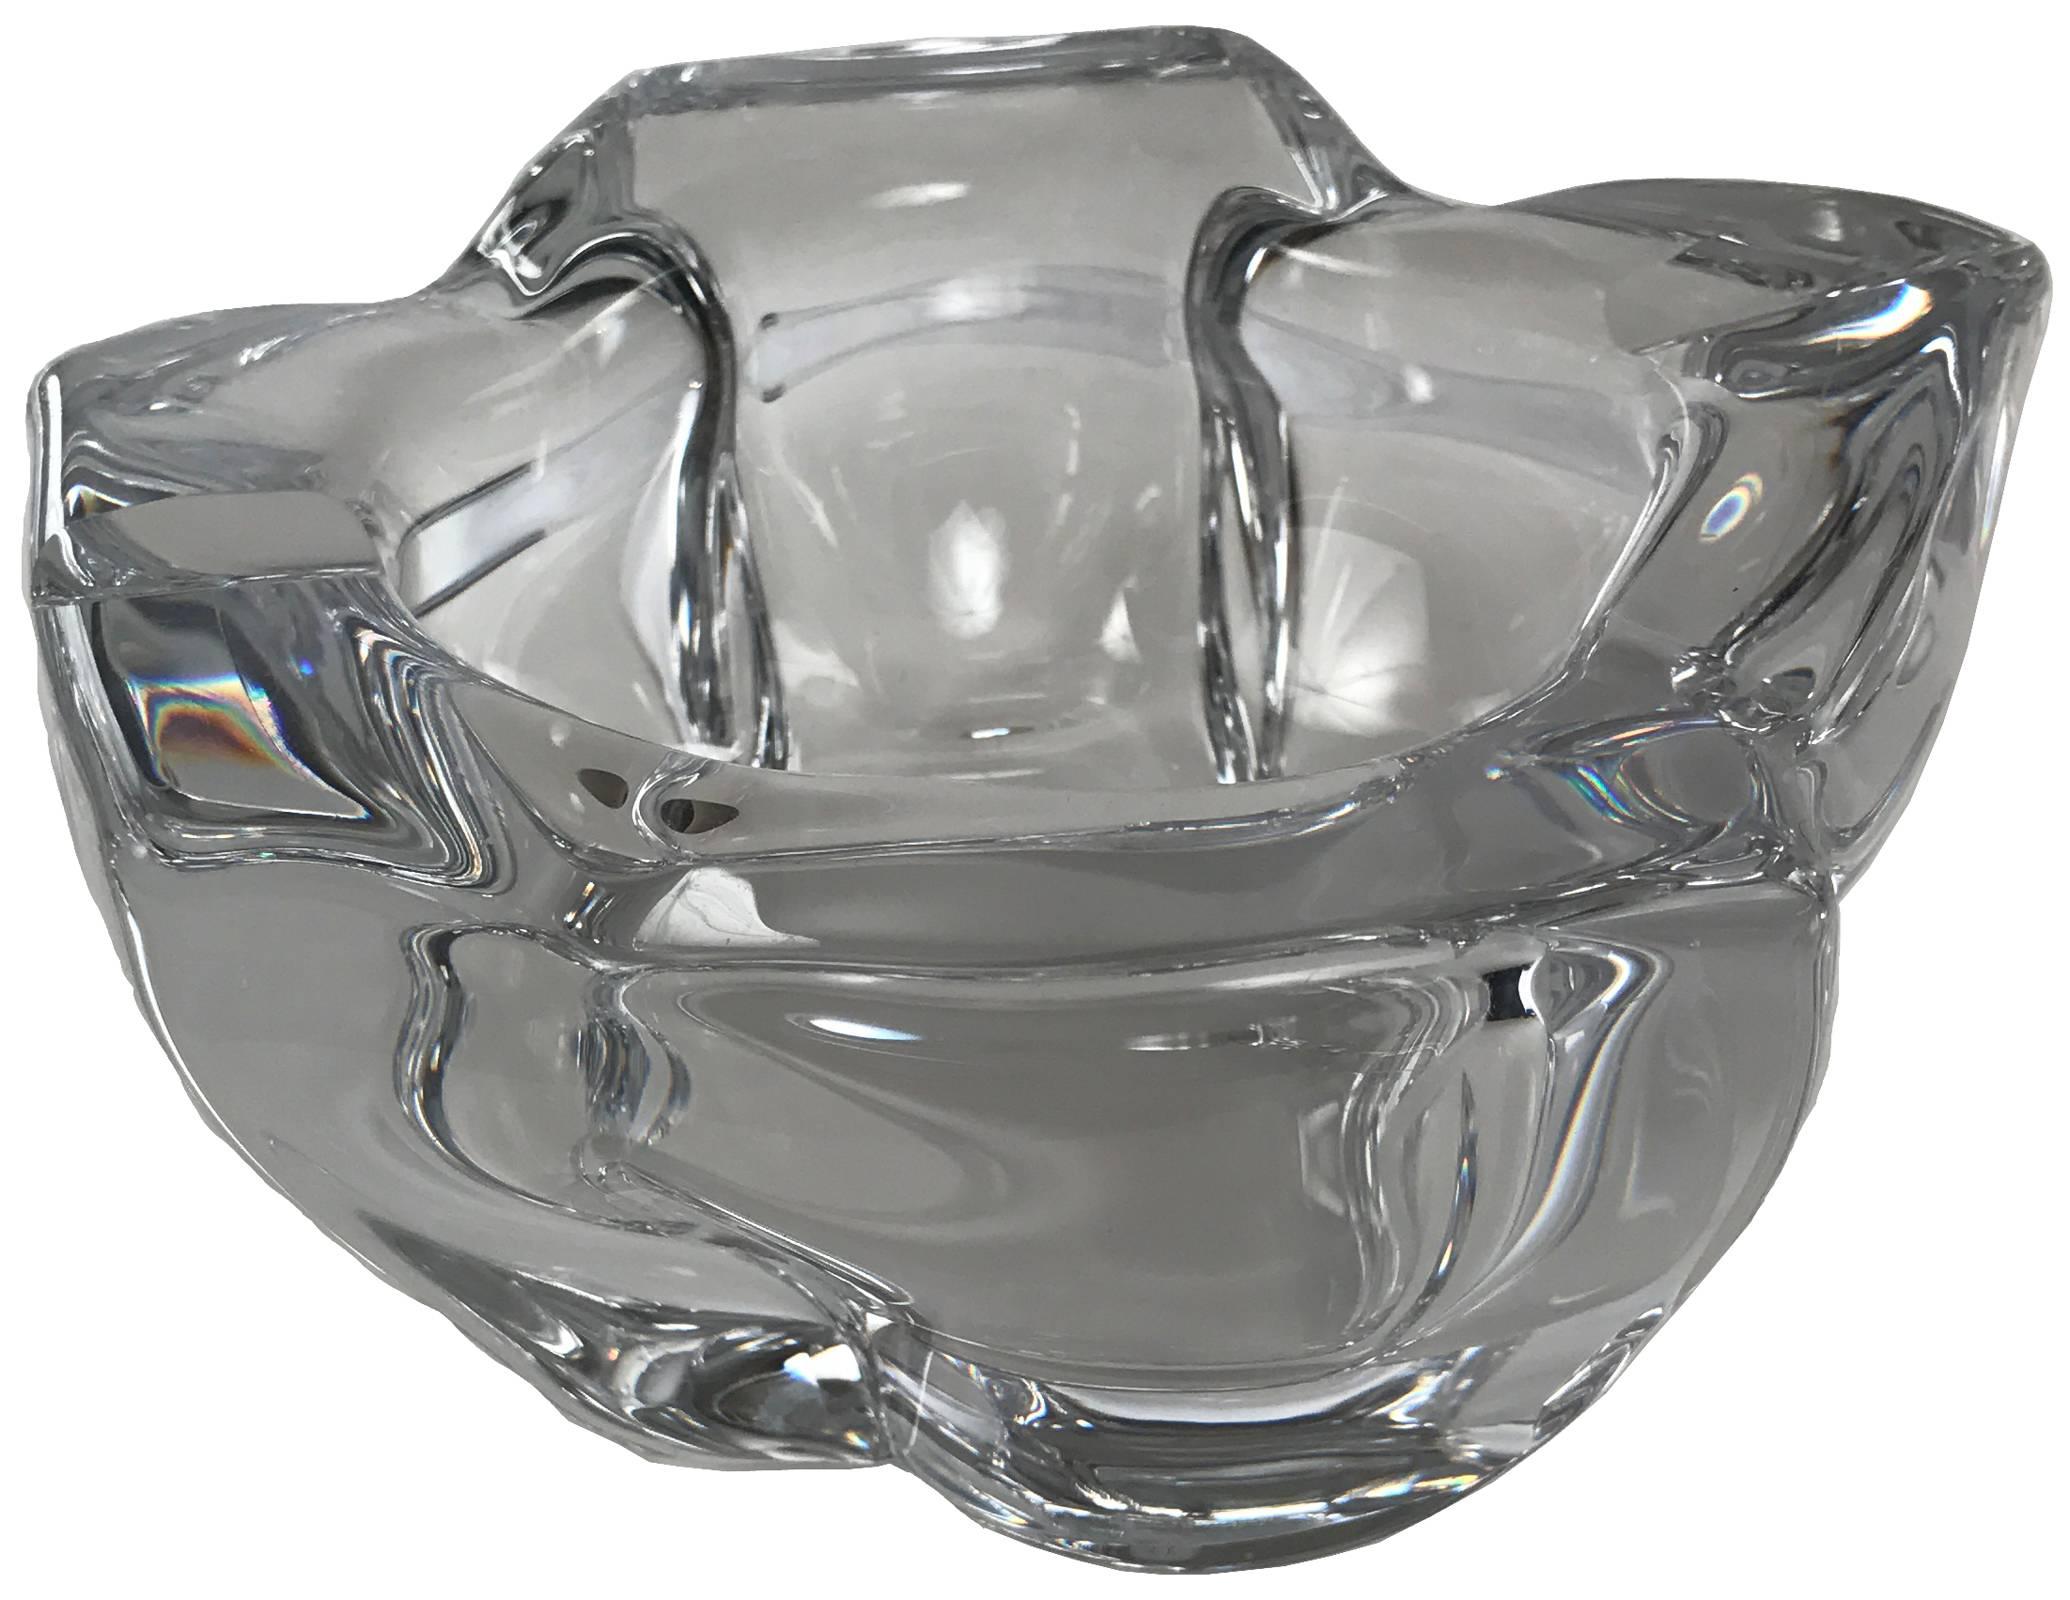 An elegantly substantial French Daum crystal ashtray of abstract, organic form. It is signed on the lower edge 